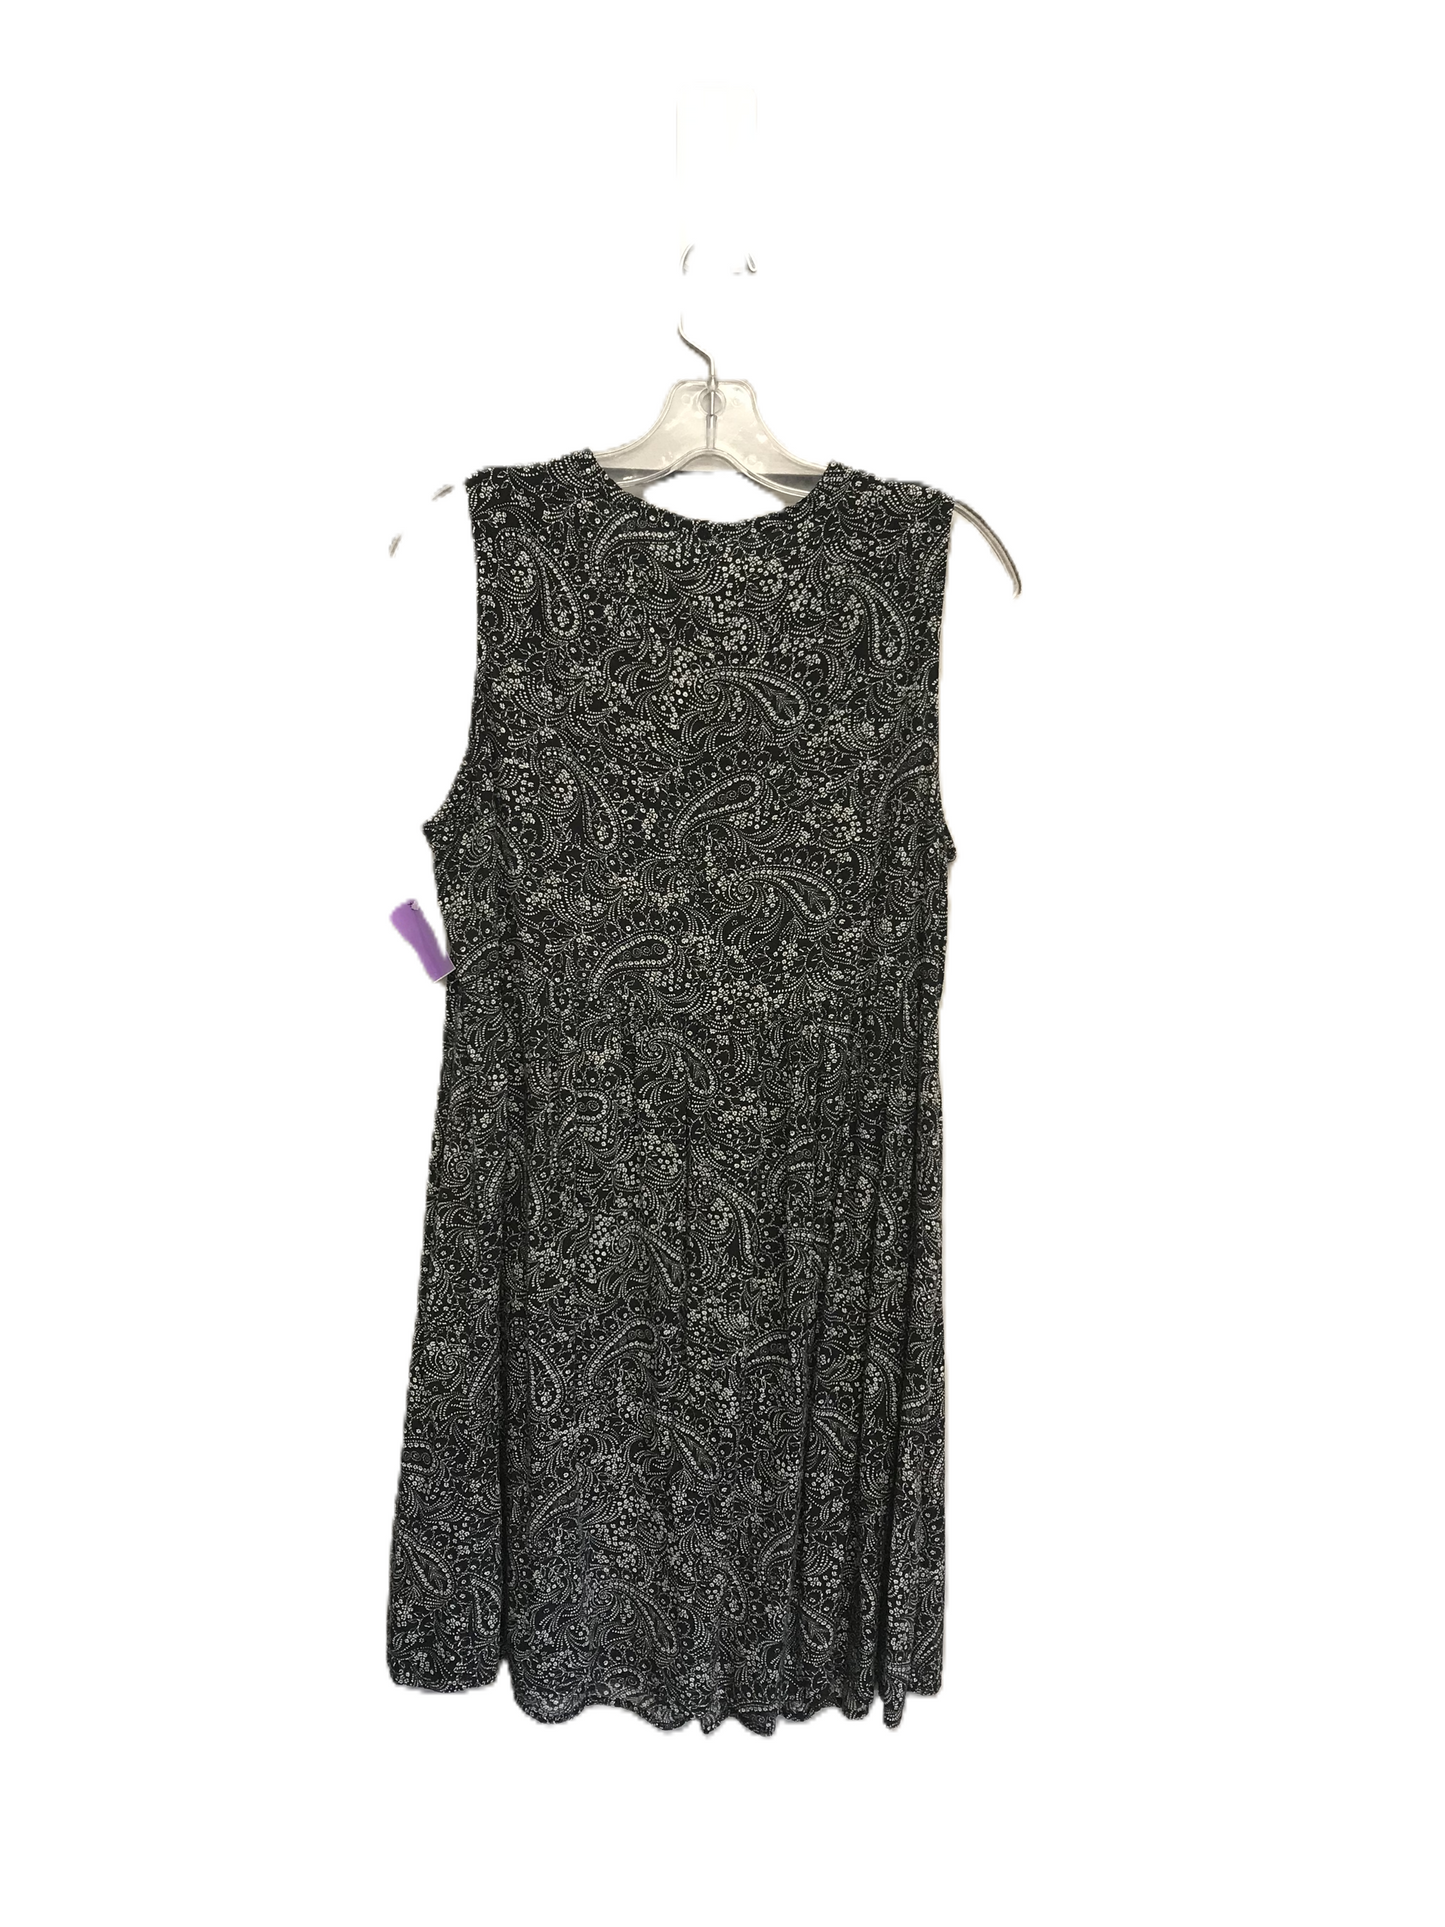 Black & White Dress Casual Short By Old Navy, Size: L